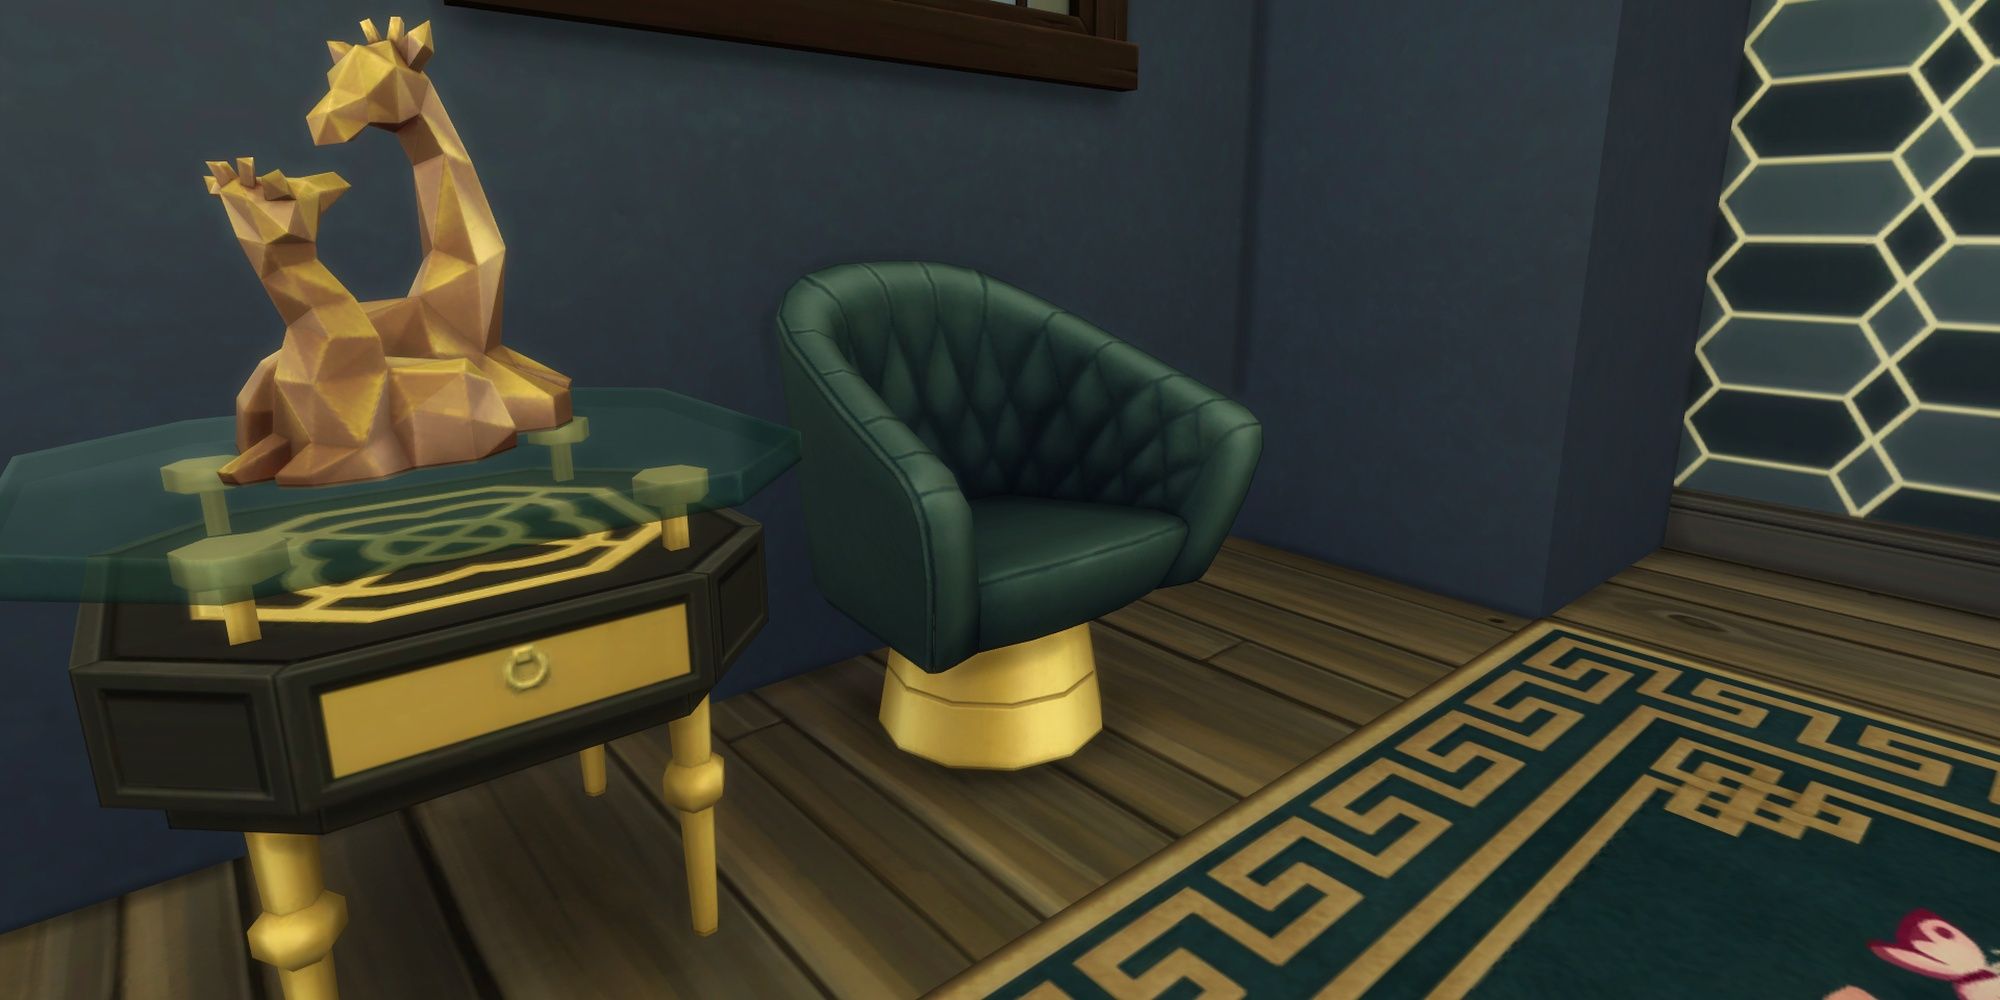 A teal and gold armchair from The Sims 4: Decor to the Max